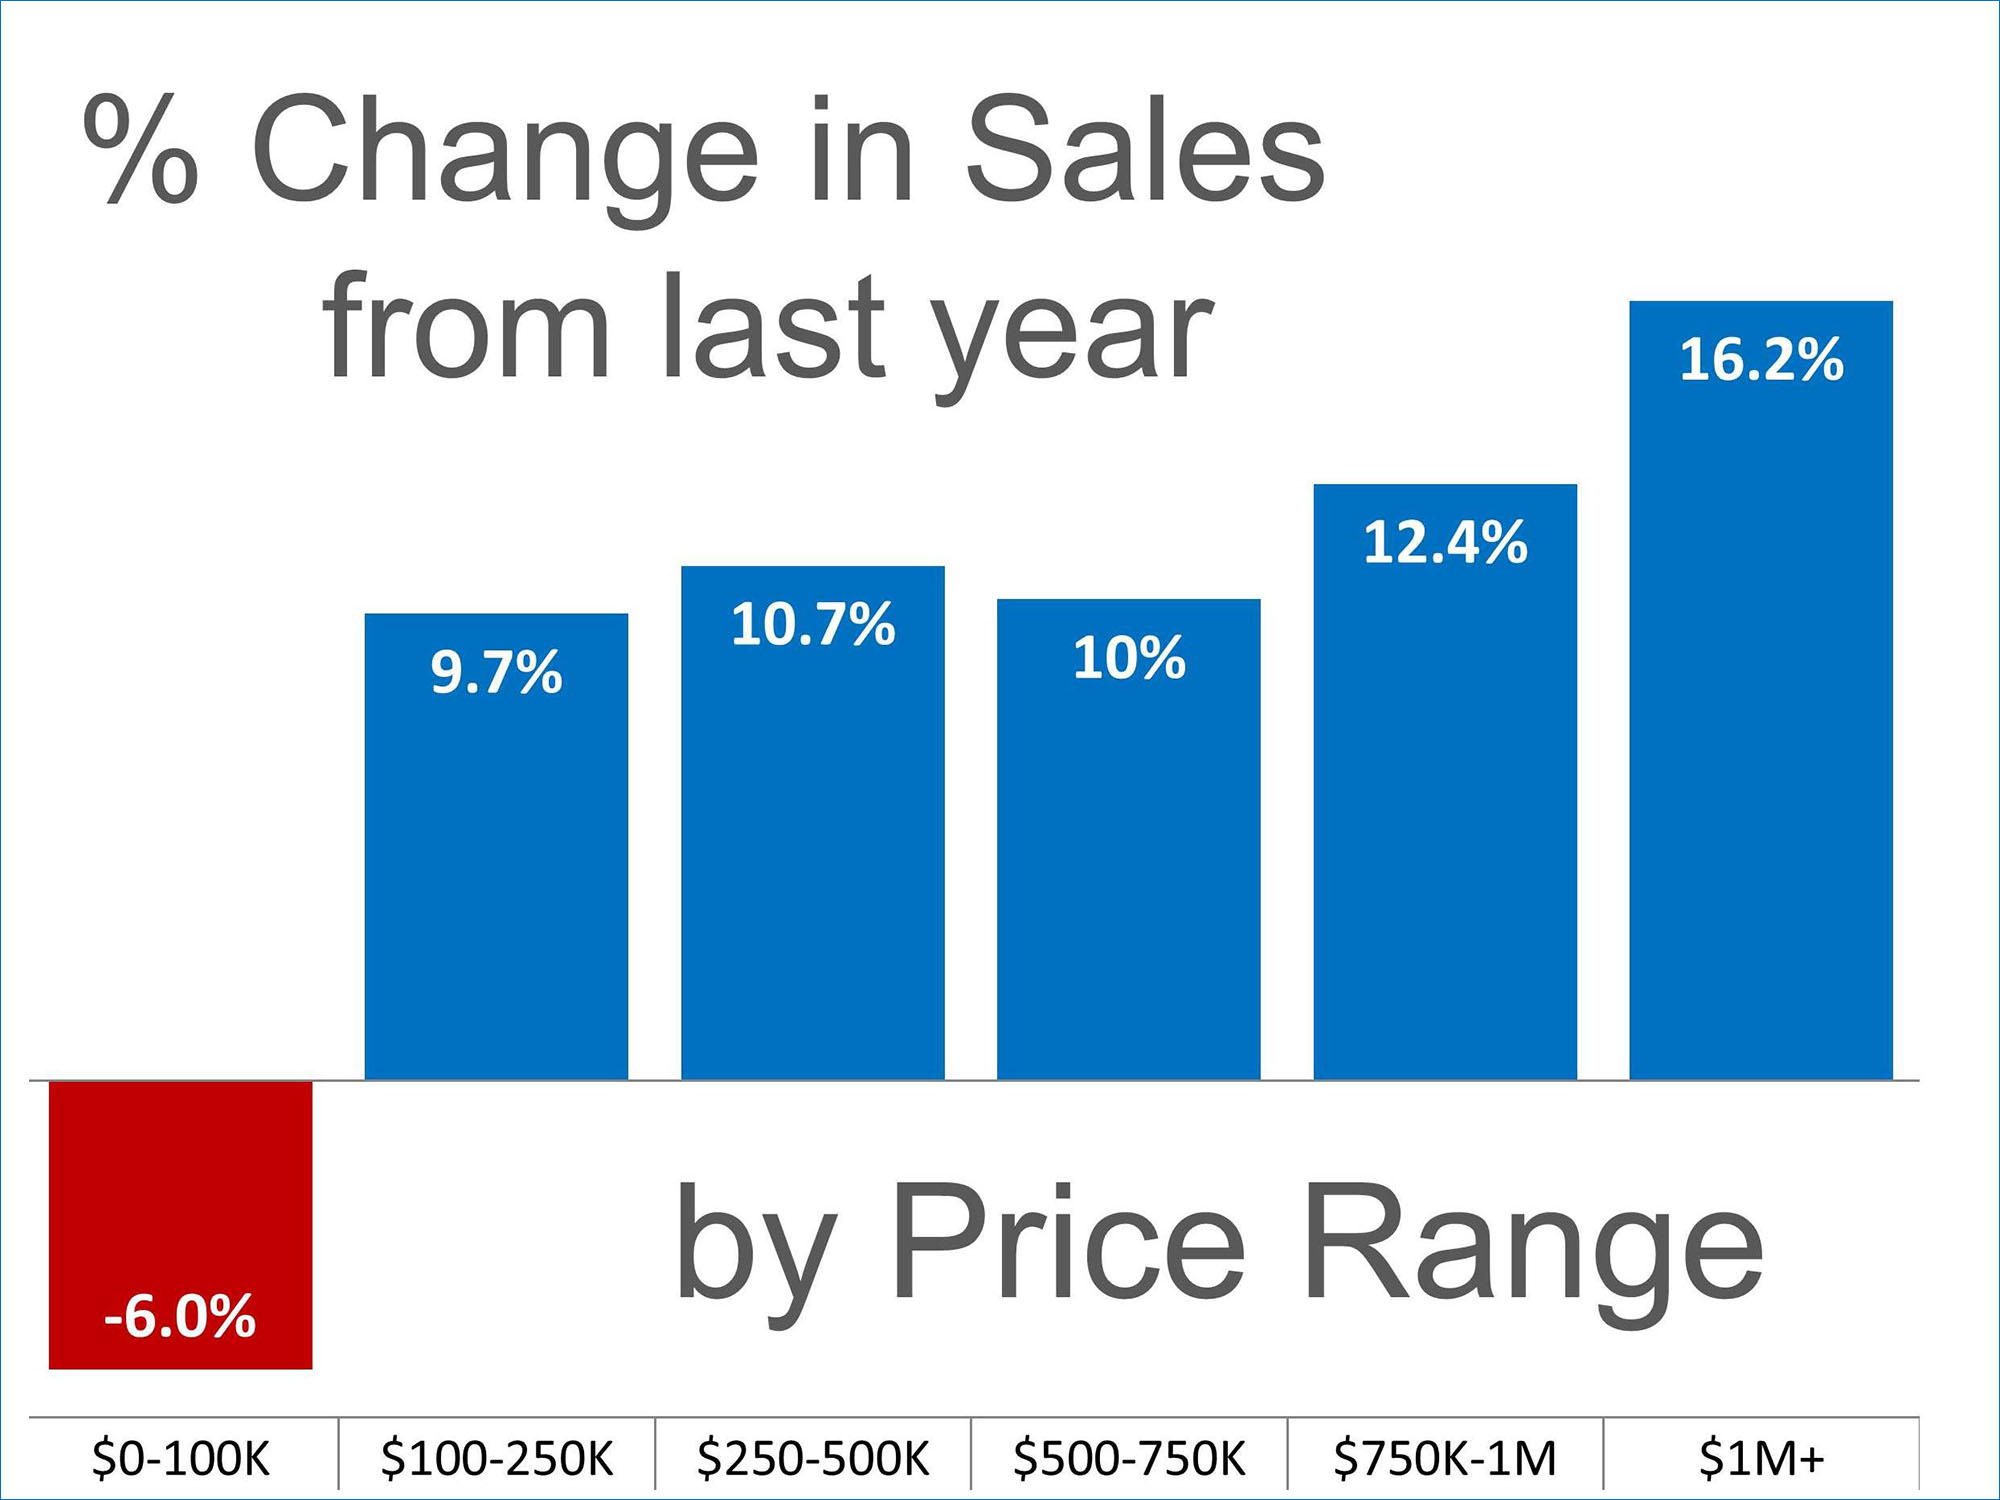 Sales Up in almost Every Price Range | Simplifying The Market